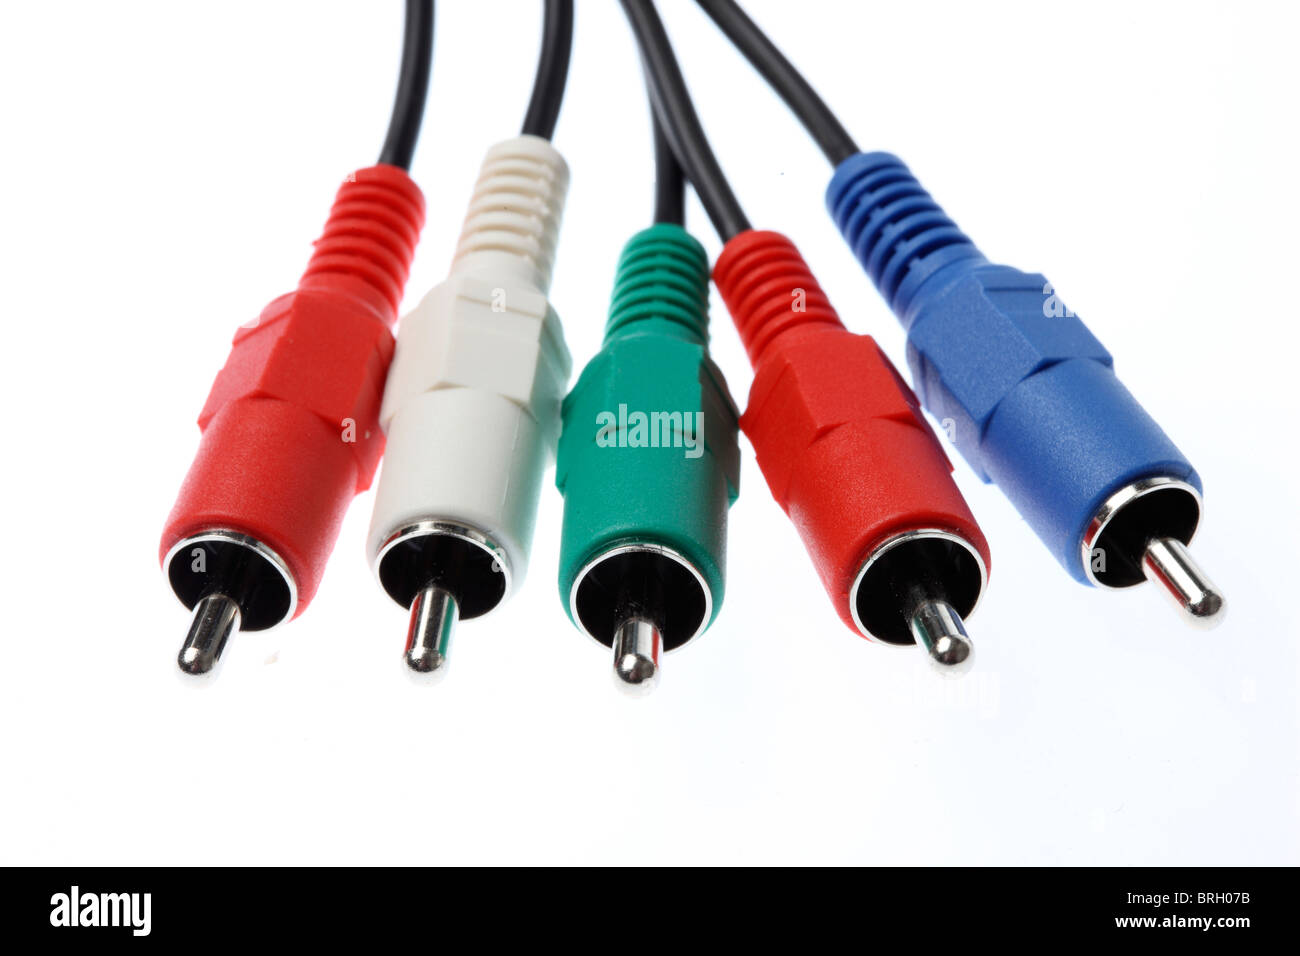 Cinch cable, cinch plugs, RCA Jack, for audio and video signals. Used for  audiovisual media, video tape recorders, sound systems Stock Photo - Alamy